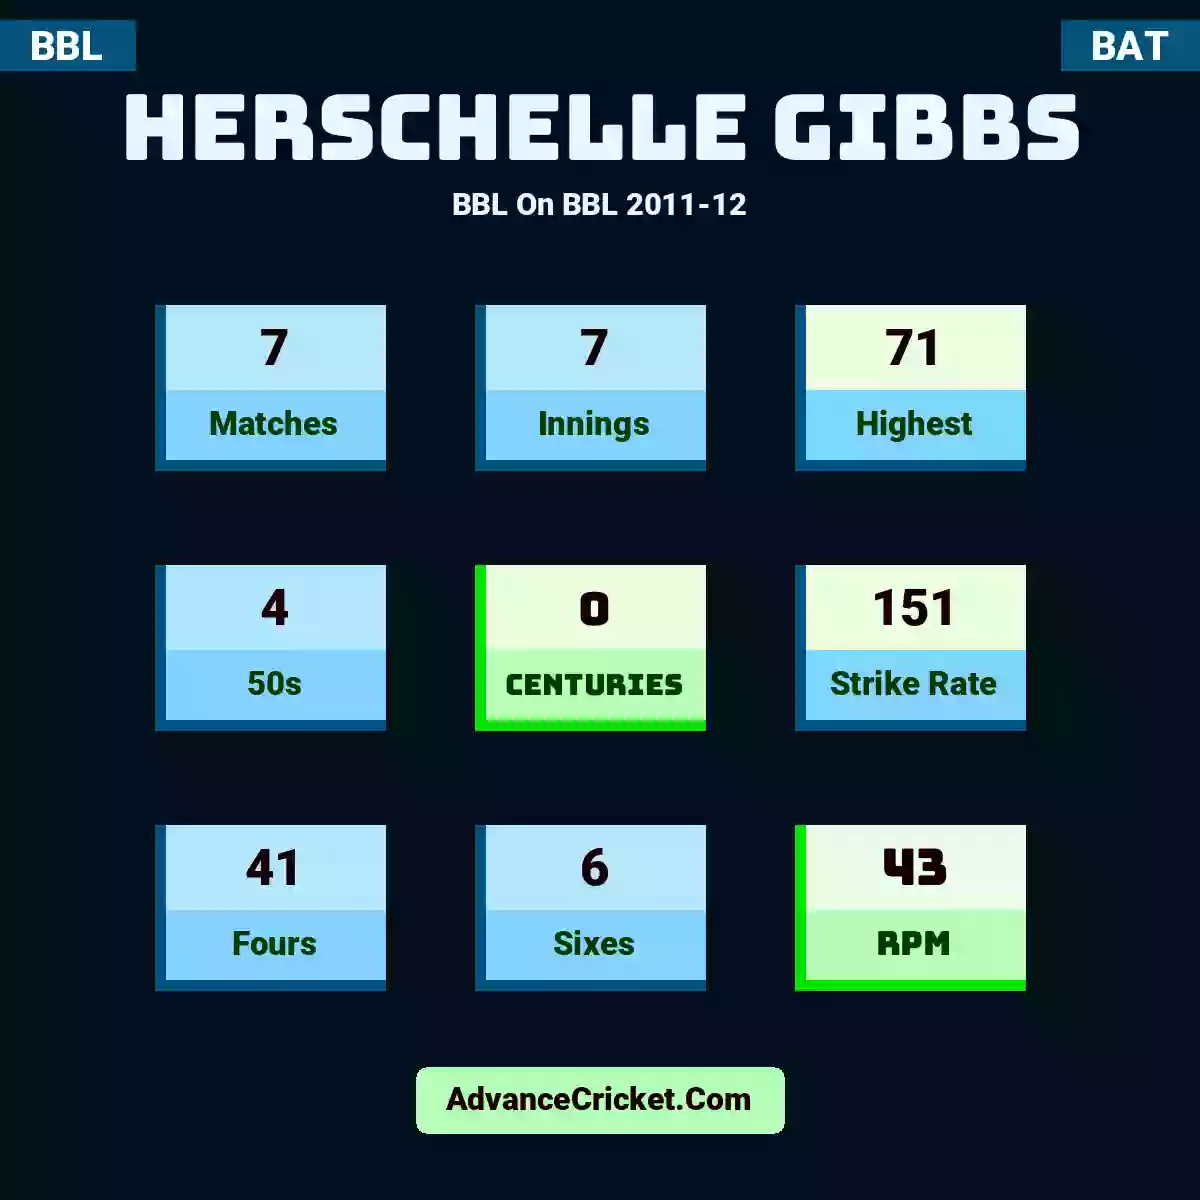 Herschelle Gibbs BBL  On BBL 2011-12, Herschelle Gibbs played 7 matches, scored 71 runs as highest, 4 half-centuries, and 0 centuries, with a strike rate of 151. H.Gibbs hit 41 fours and 6 sixes, with an RPM of 43.